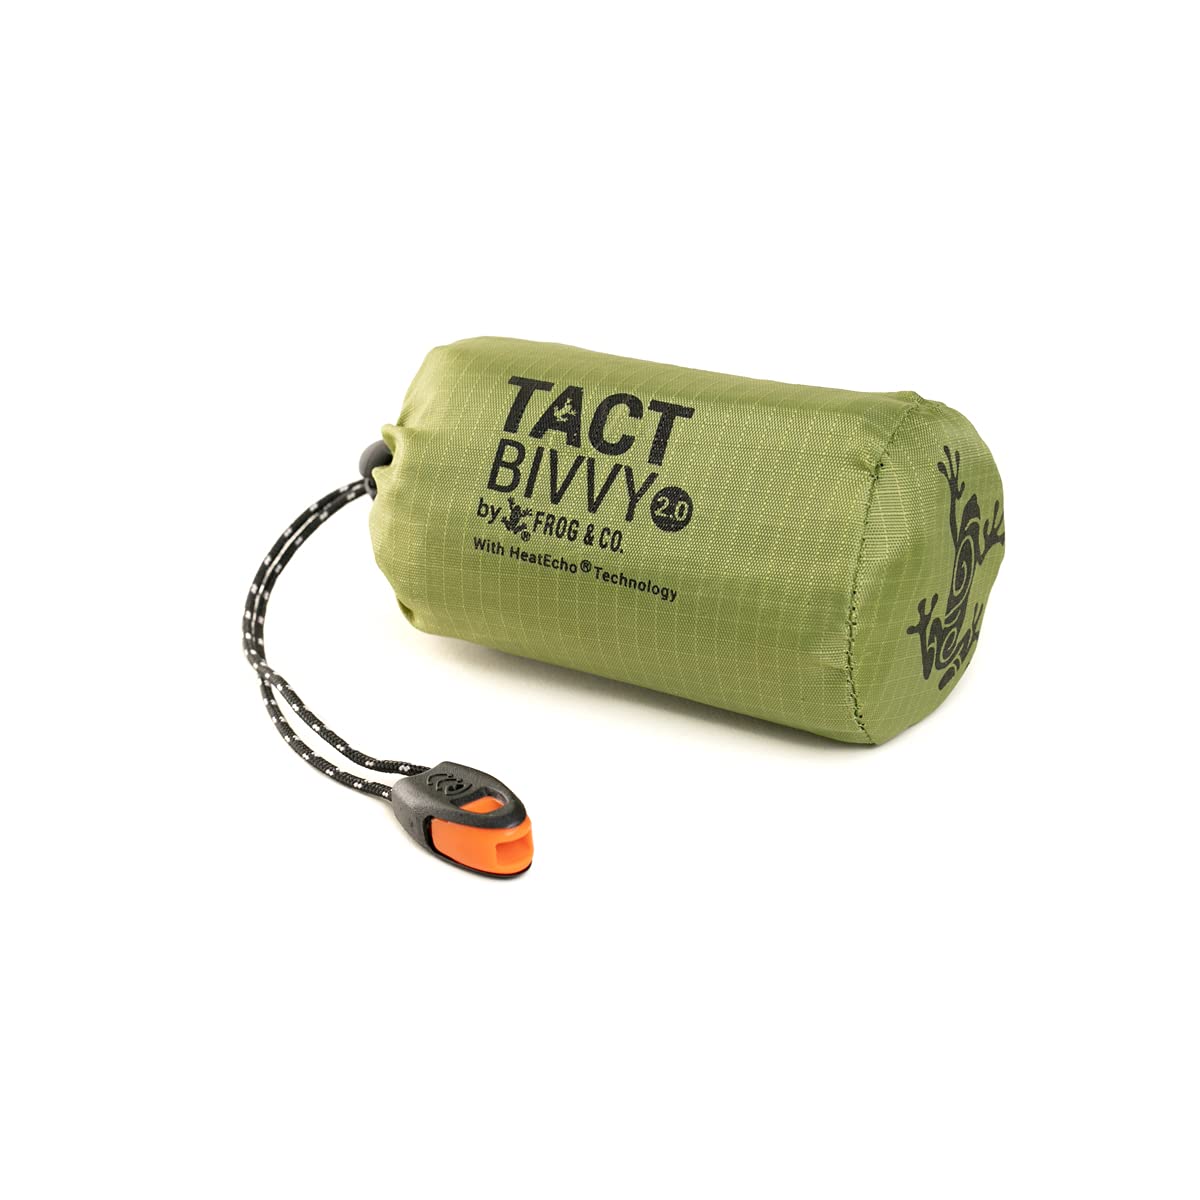 Survival Frog  Survival Gear With 6 Month Refund Guarantee!